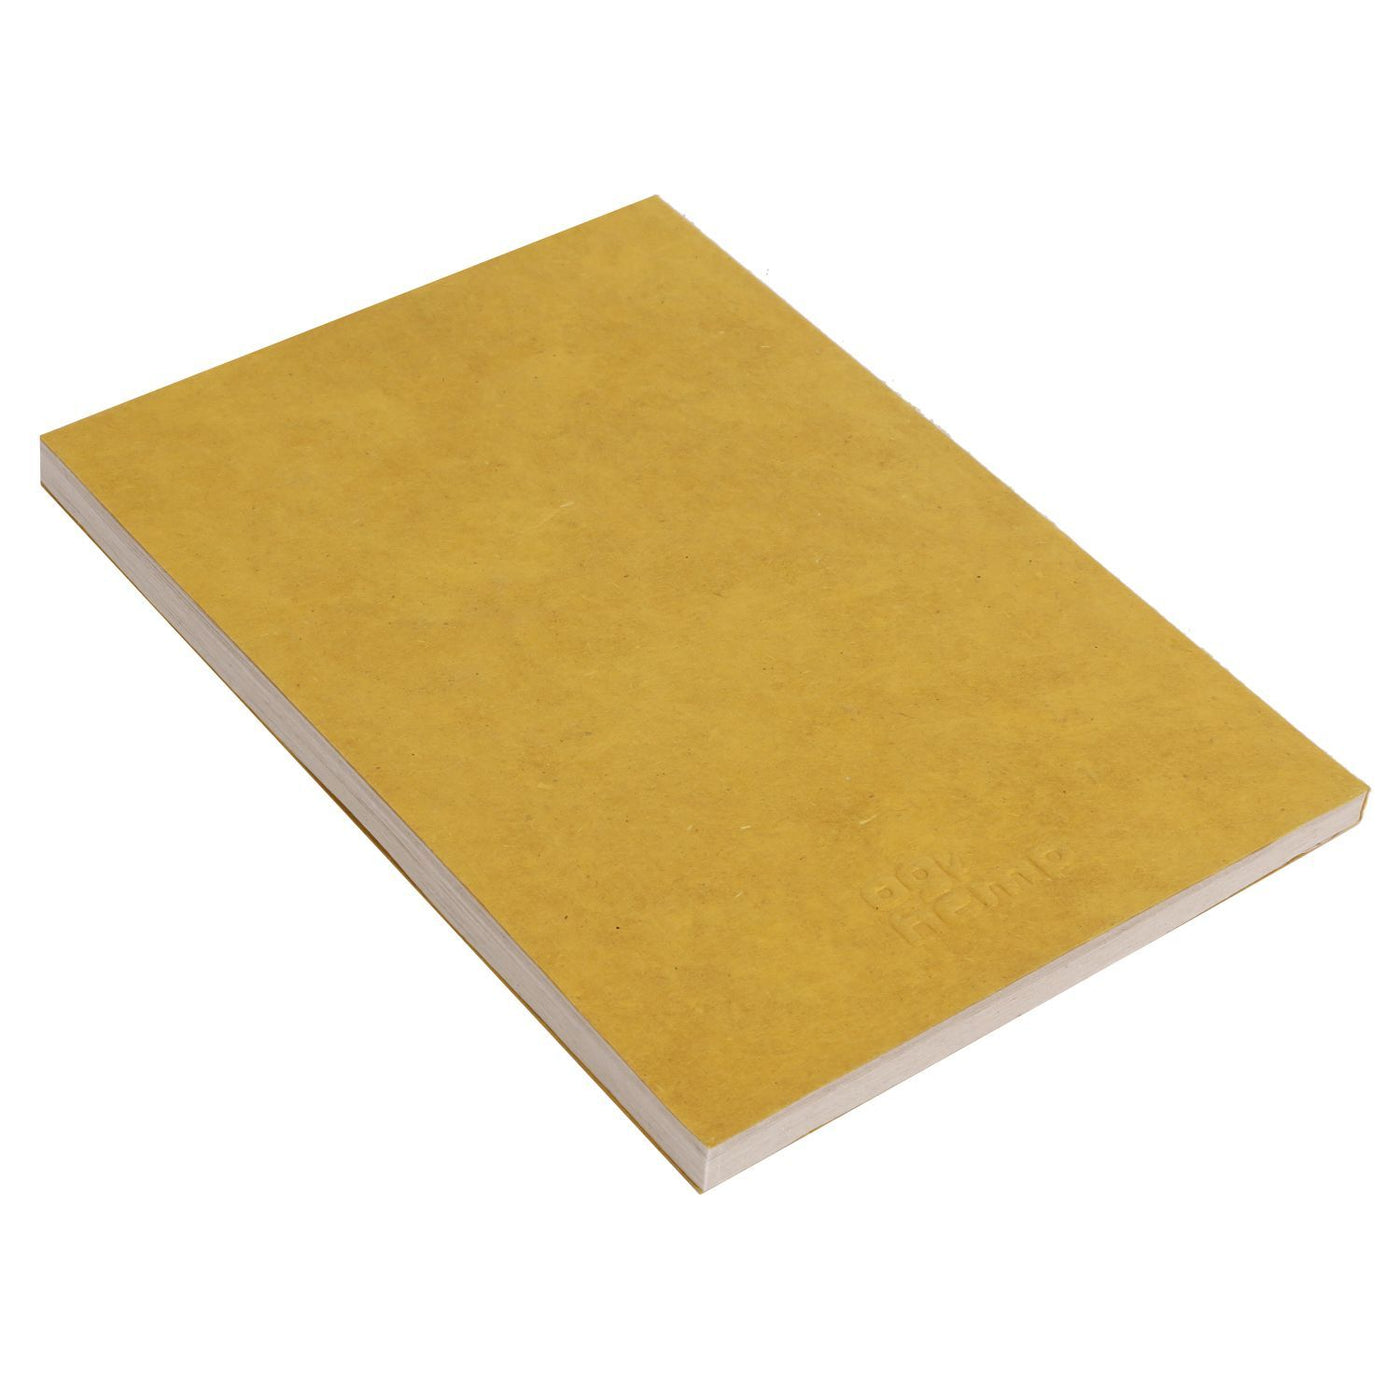 A5 Hemp GoldFoil Debossed Wiro Diary- View 2